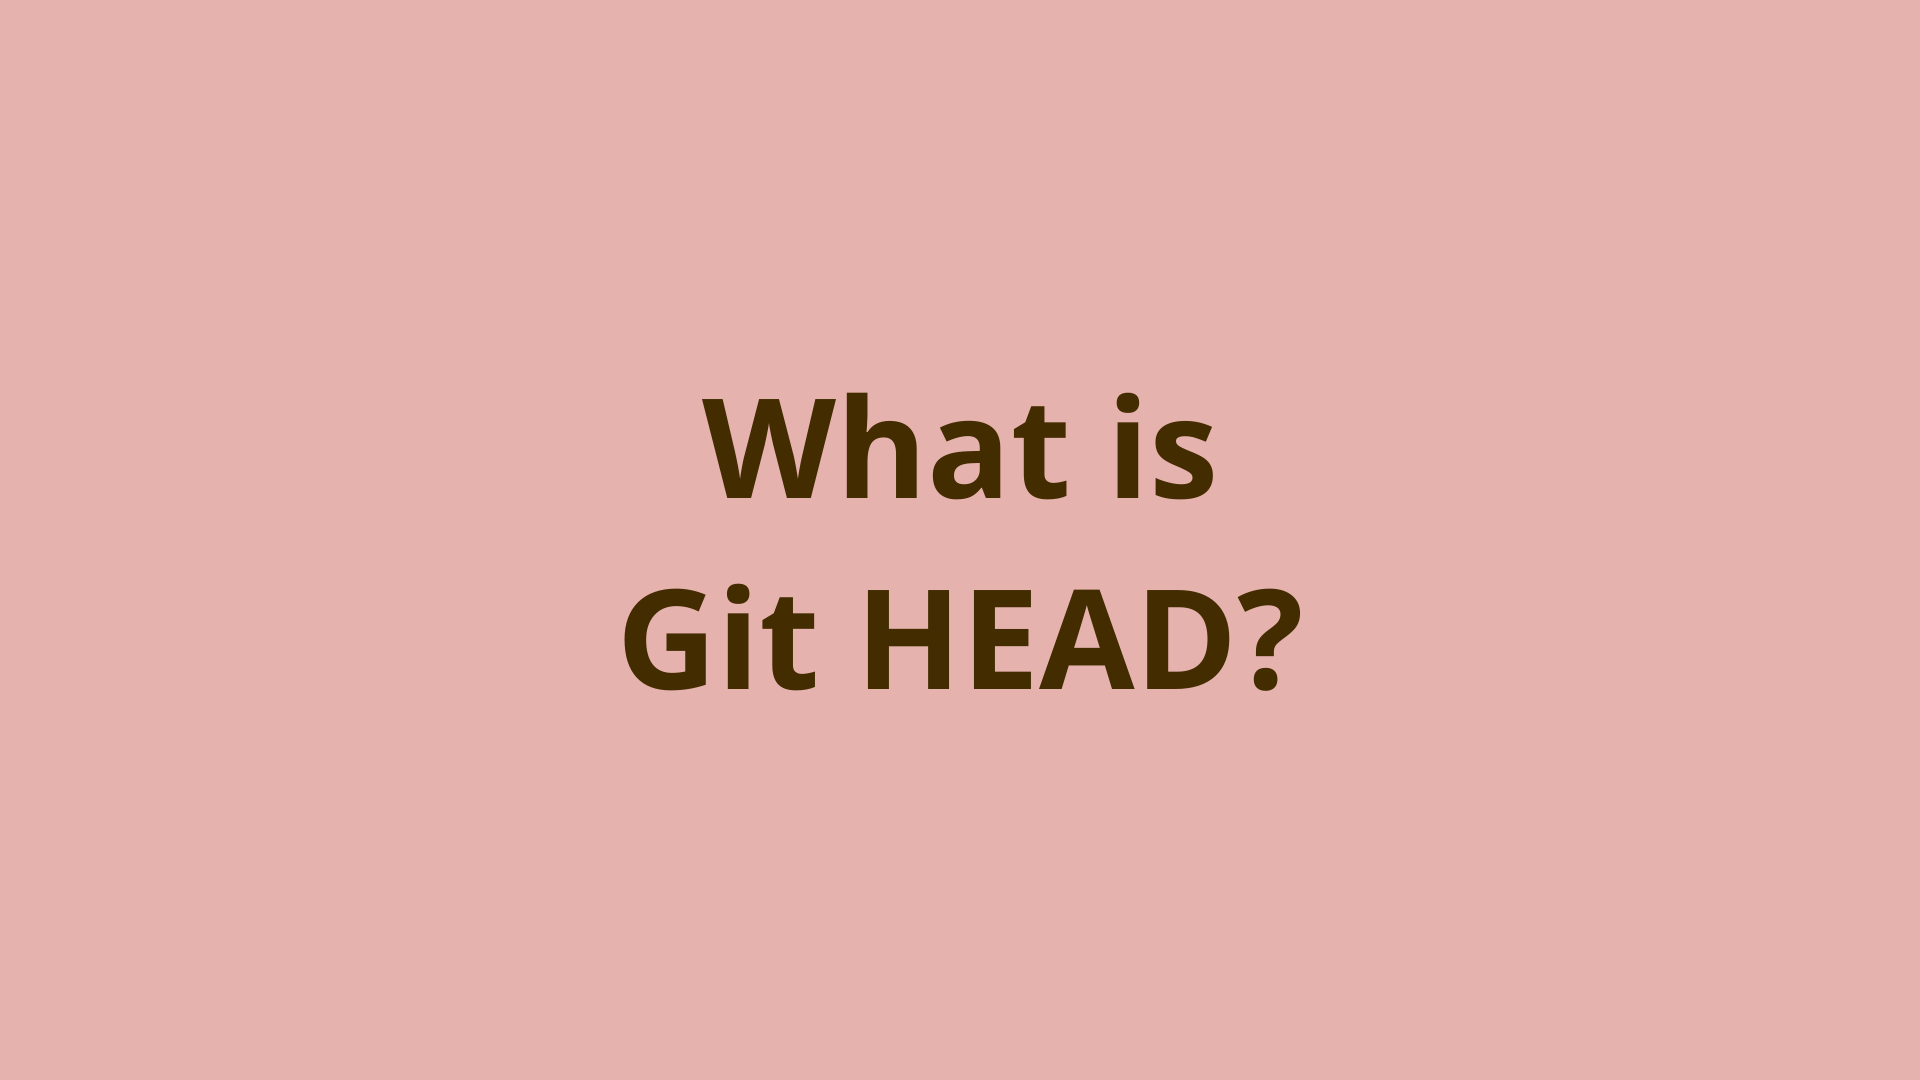 Image of What is Git HEAD?